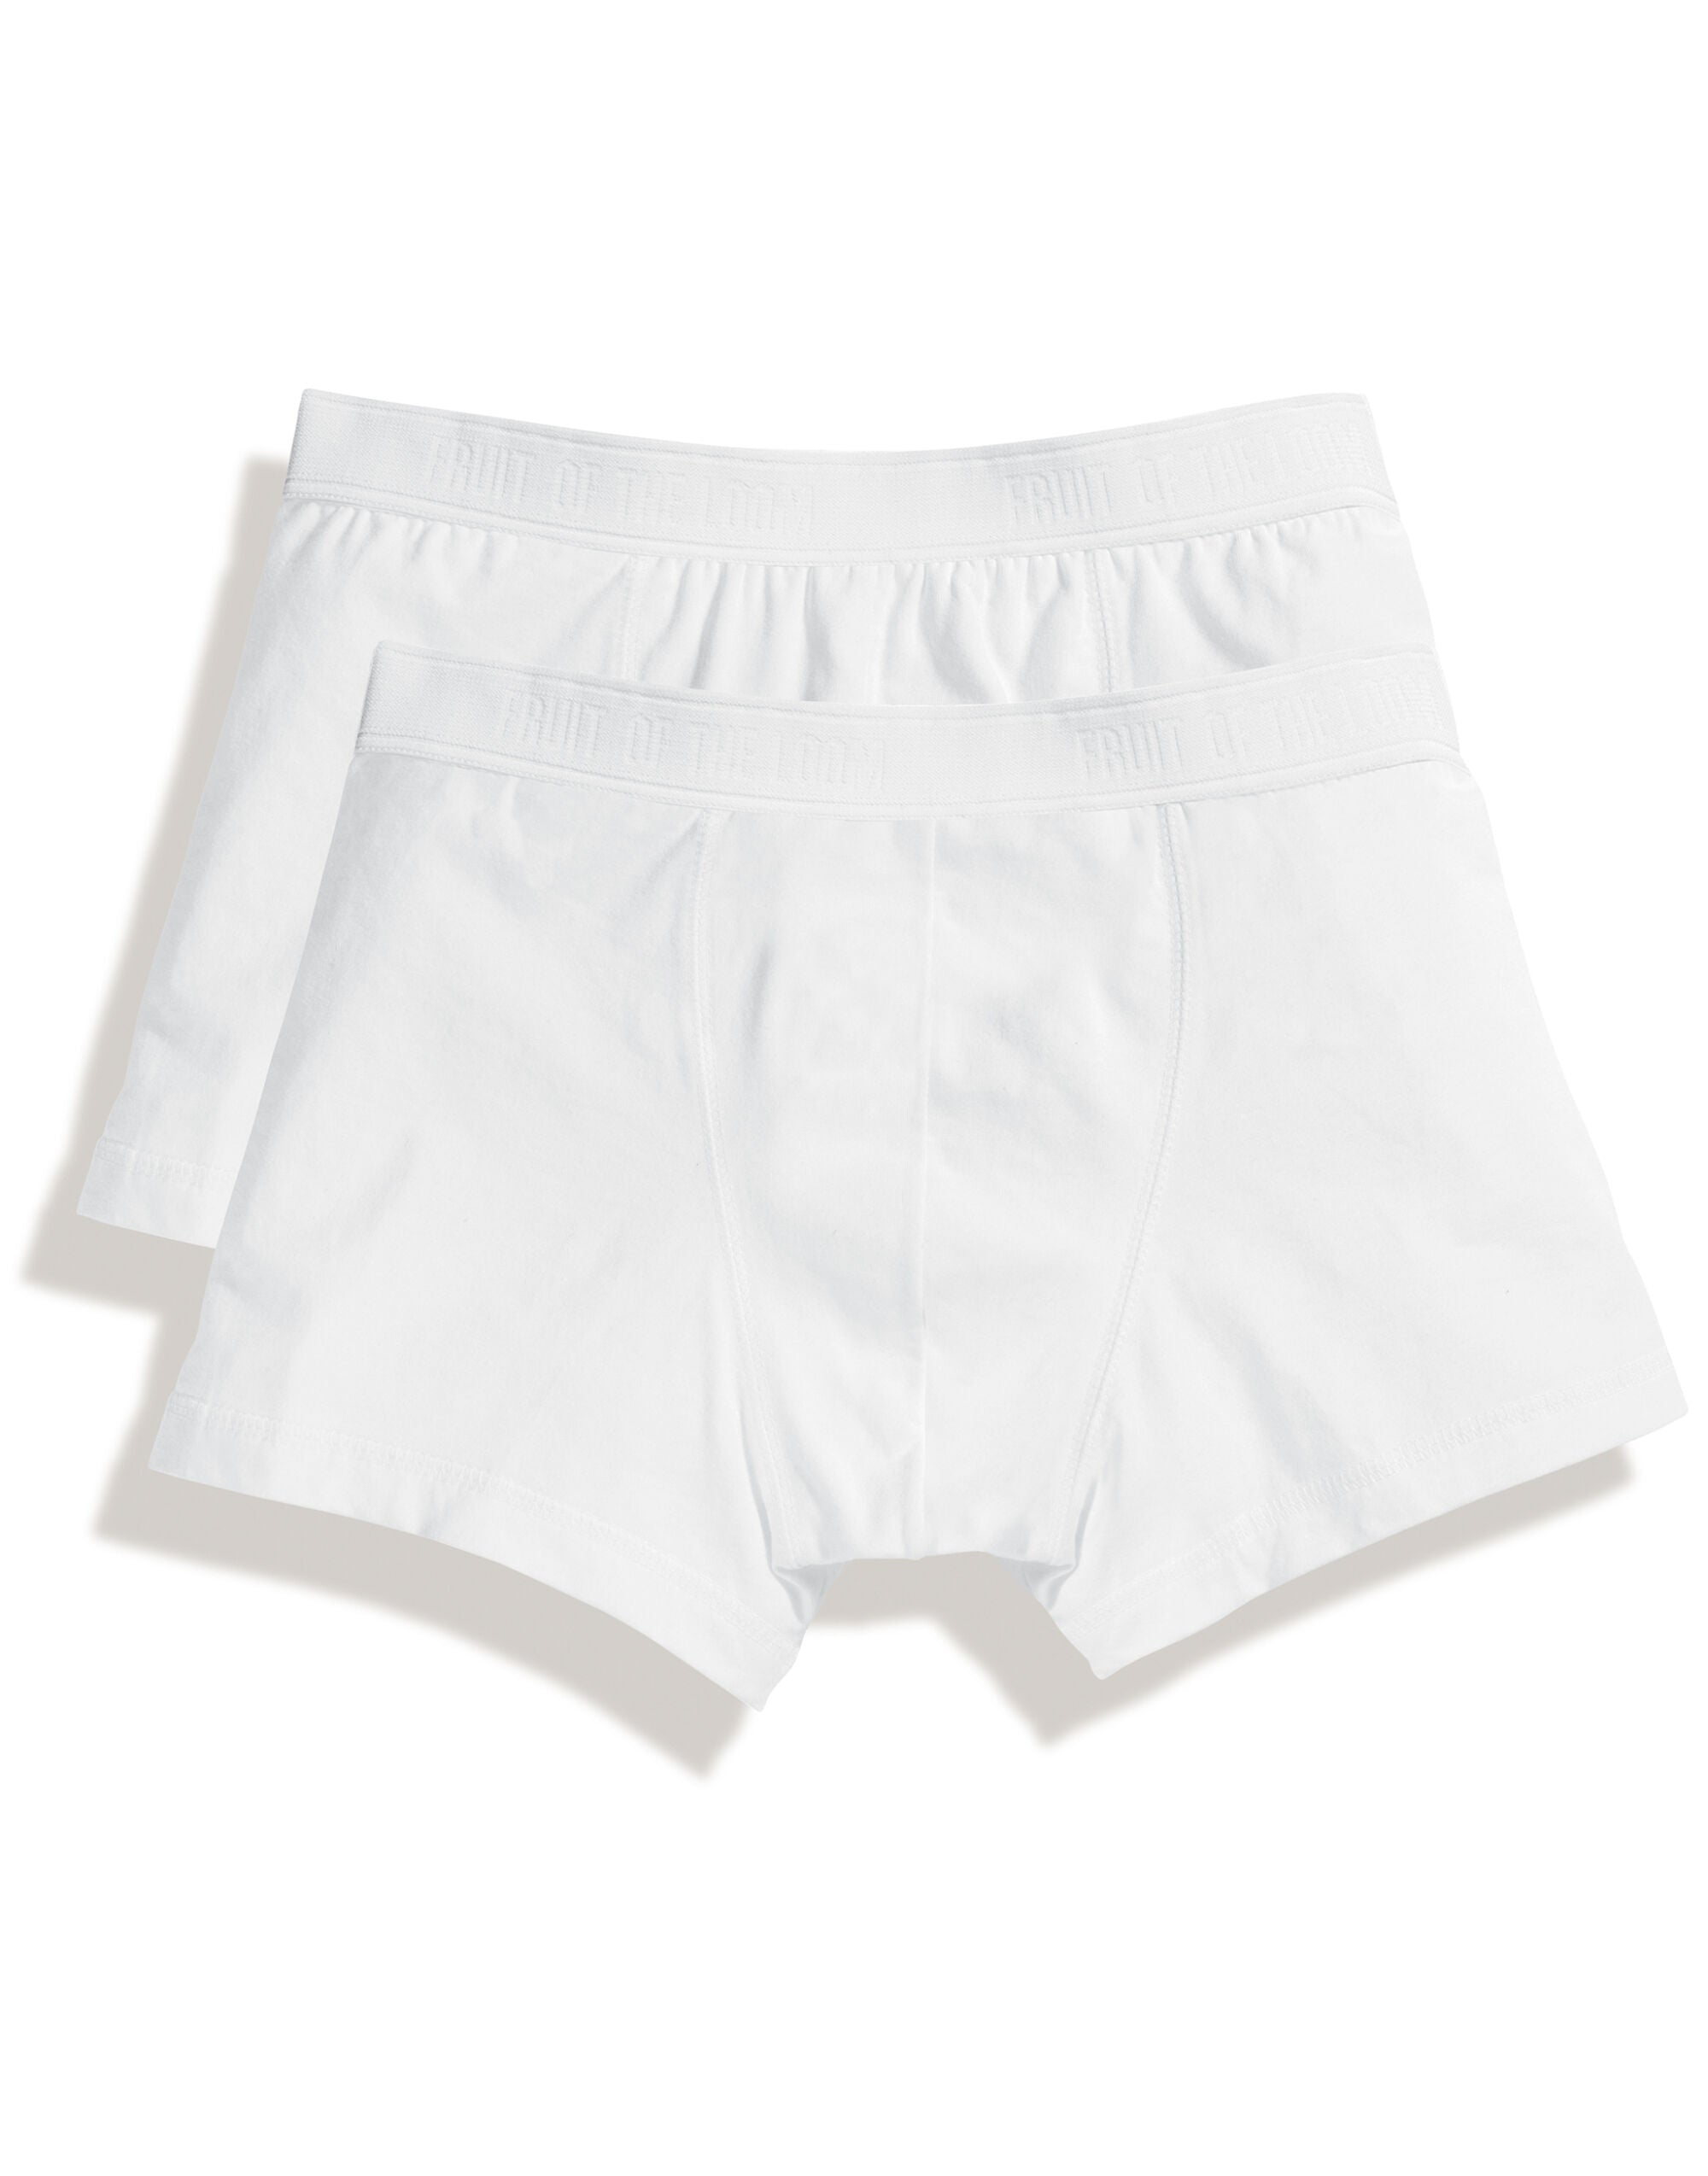 Fruit Of The Loom Underwear Men's Classic Shorty (2 Pack) Modern trunk styling with shorter leg length (67020)